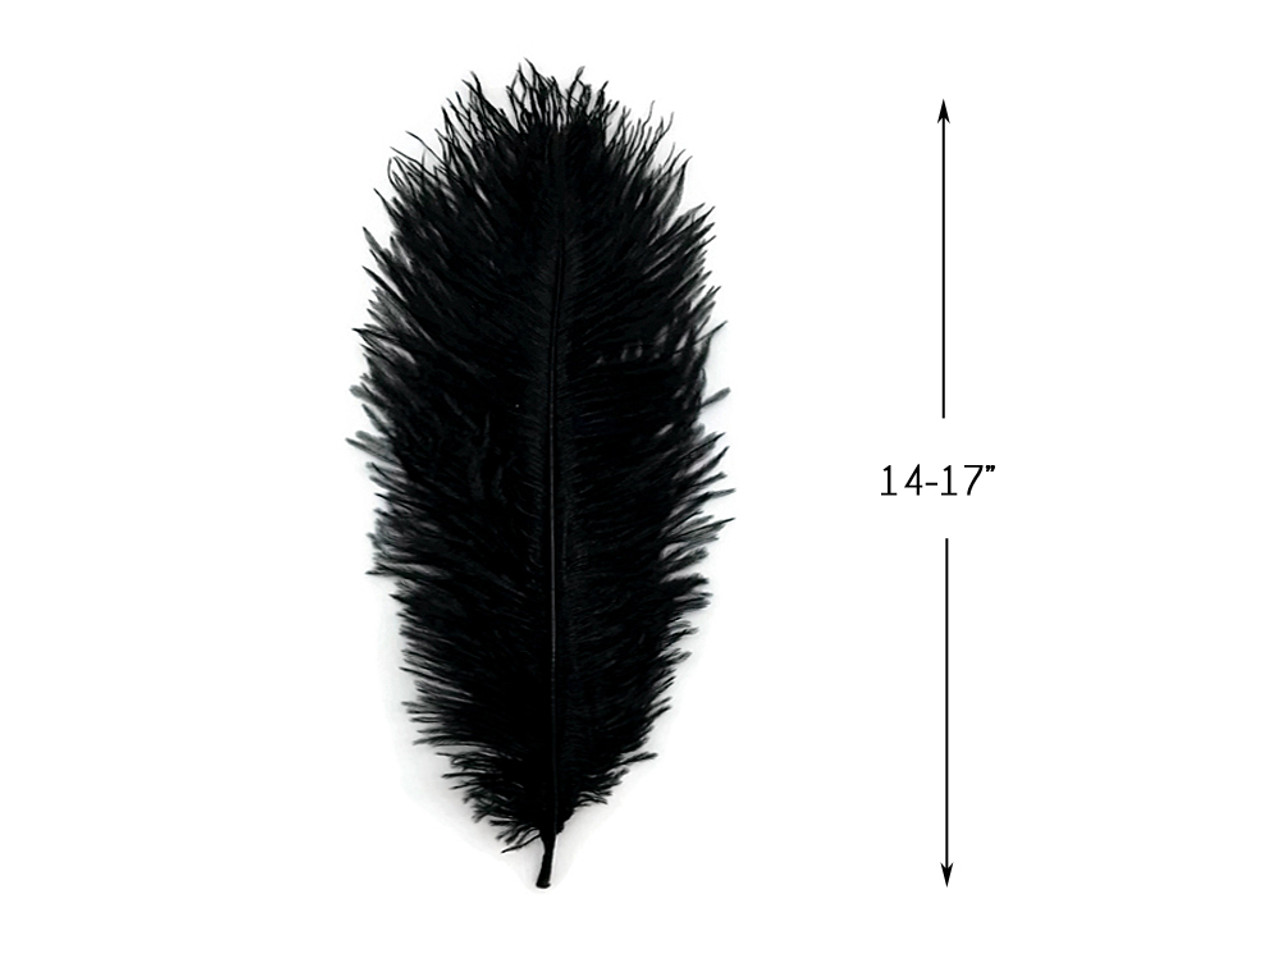 1/2 lb - 14-17 inch Off White Ostrich Large Drab Wholesale Feathers (Bulk)